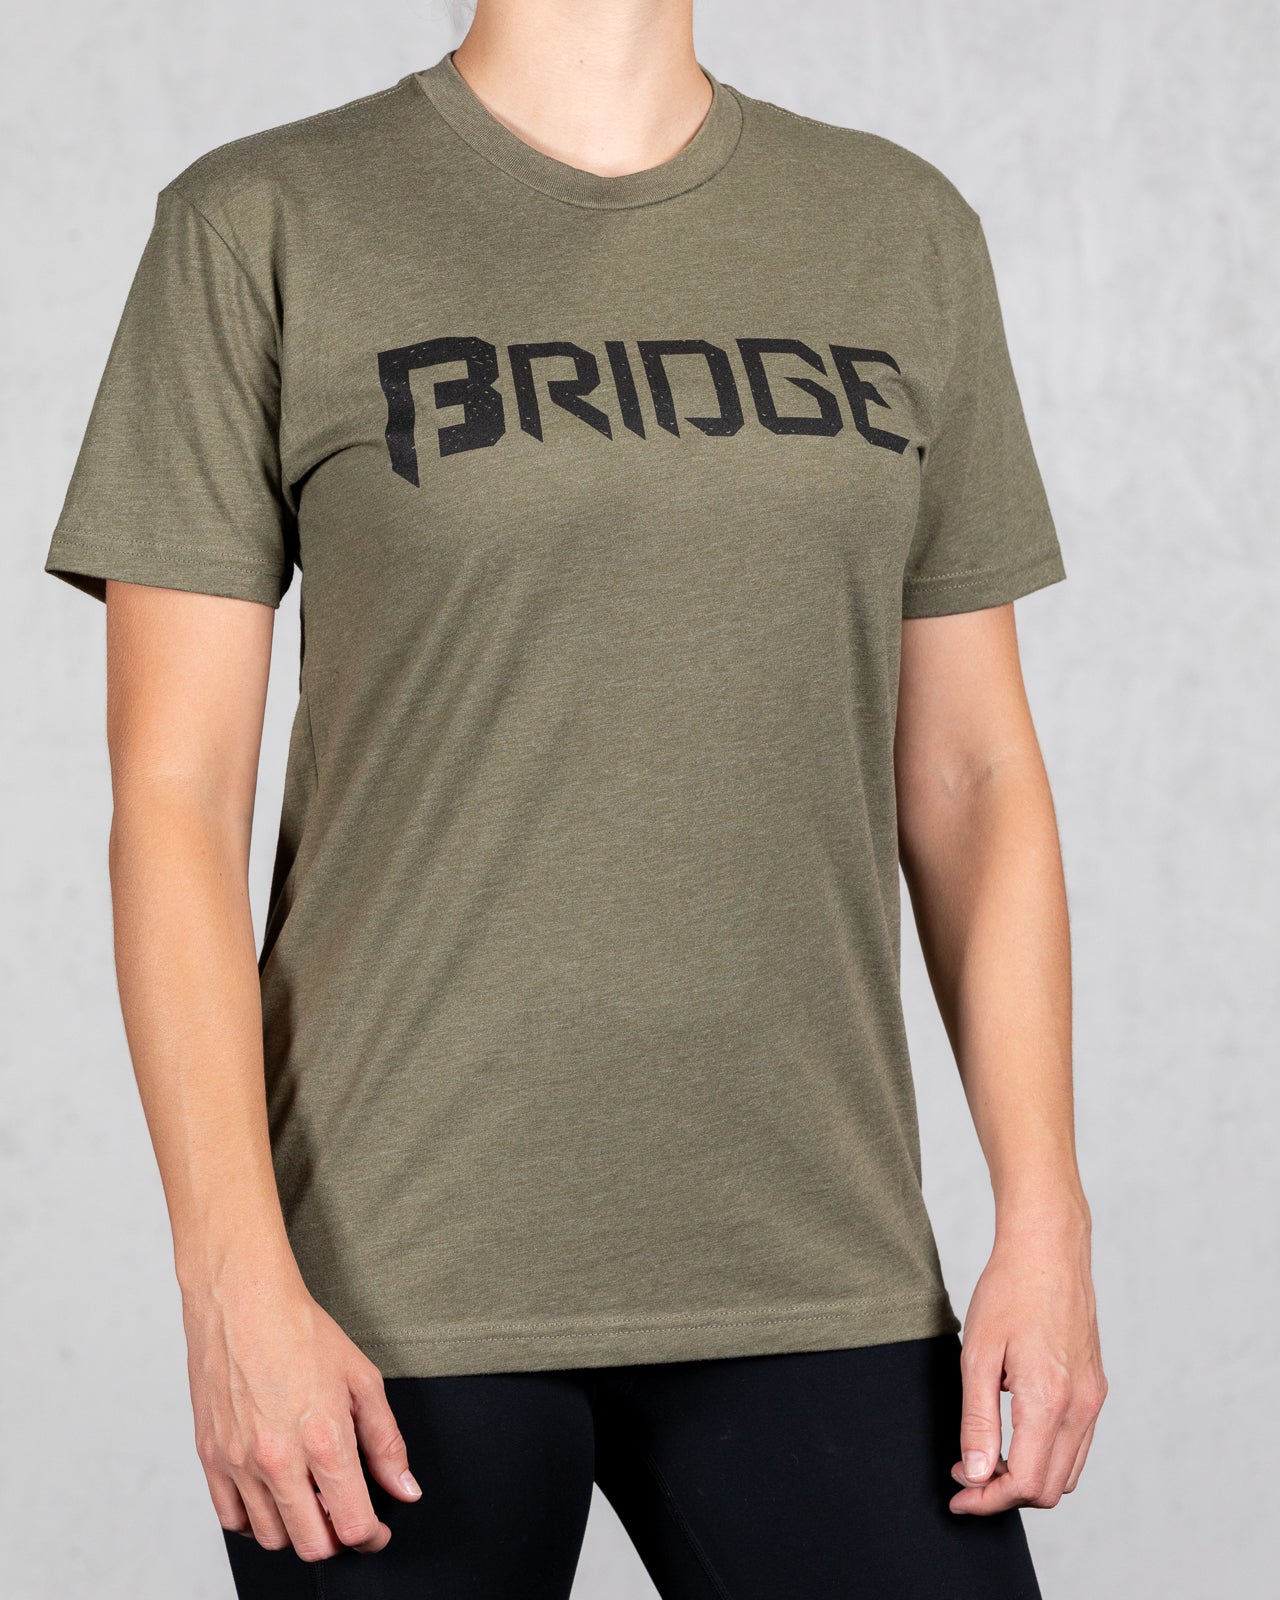 woman wearing military green squad tee with bridge on the front